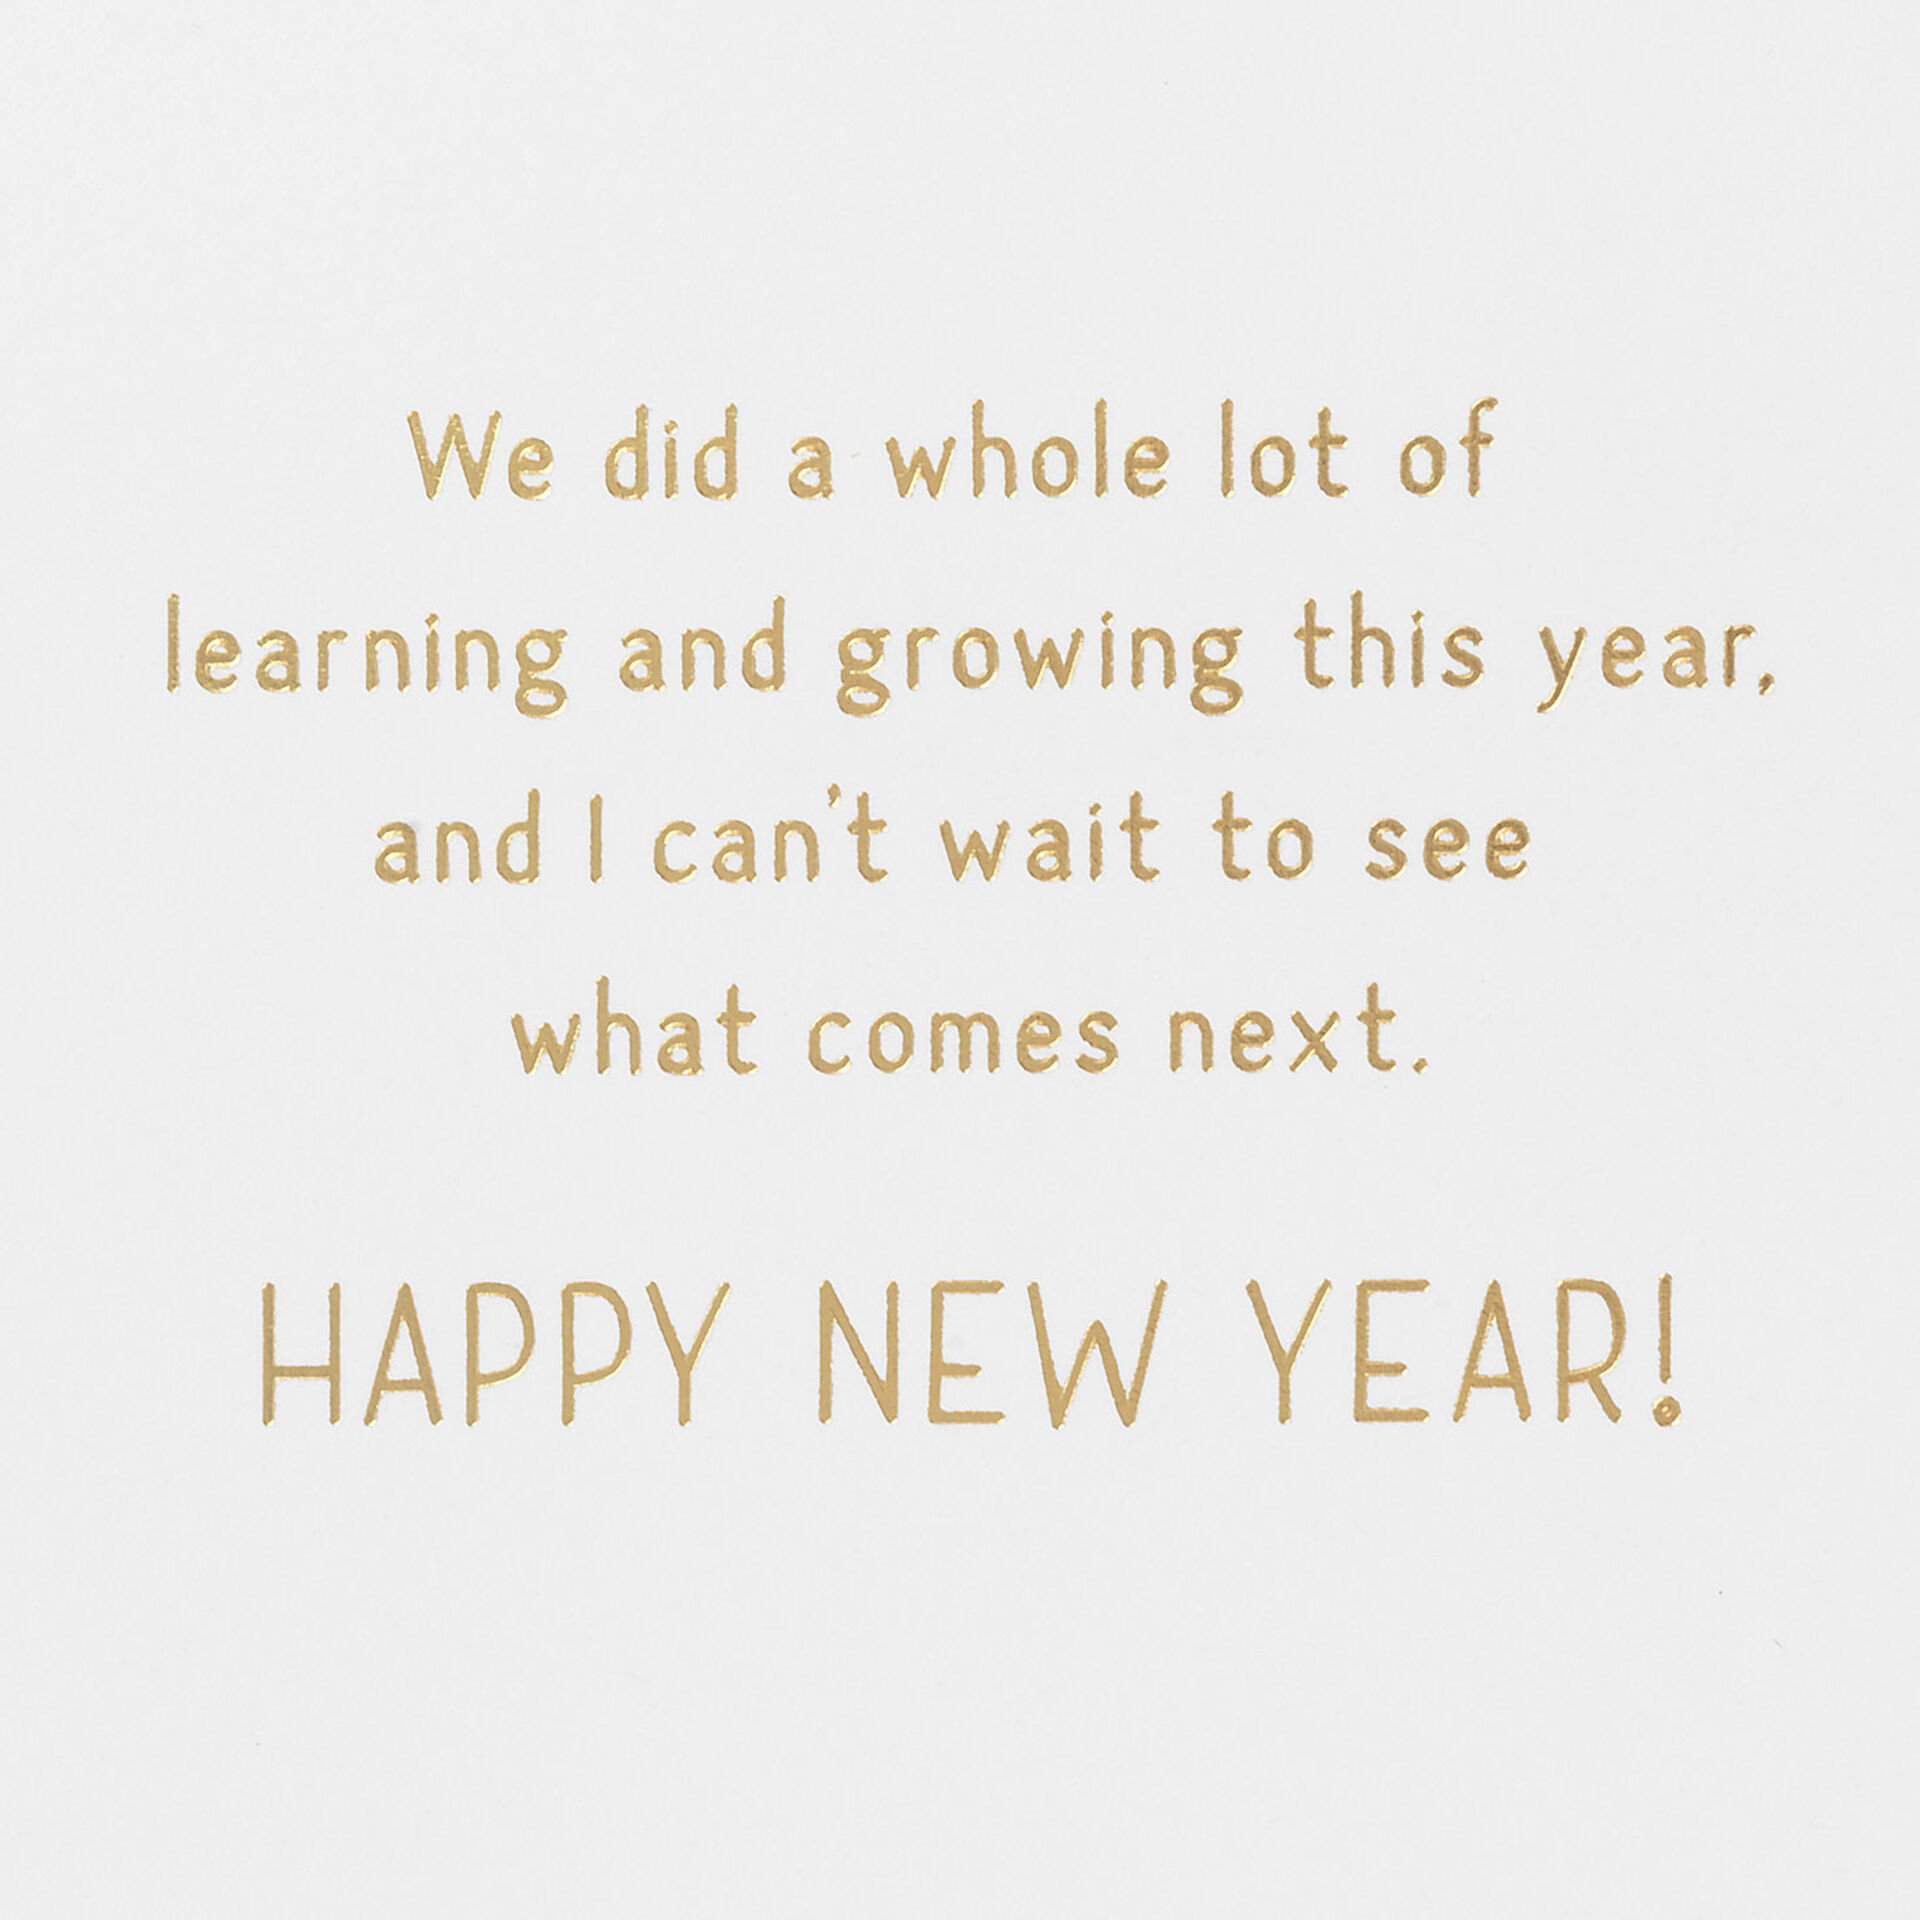 Hands-Clapping-and-Confetti-New-Year-Card_399NY5026_02